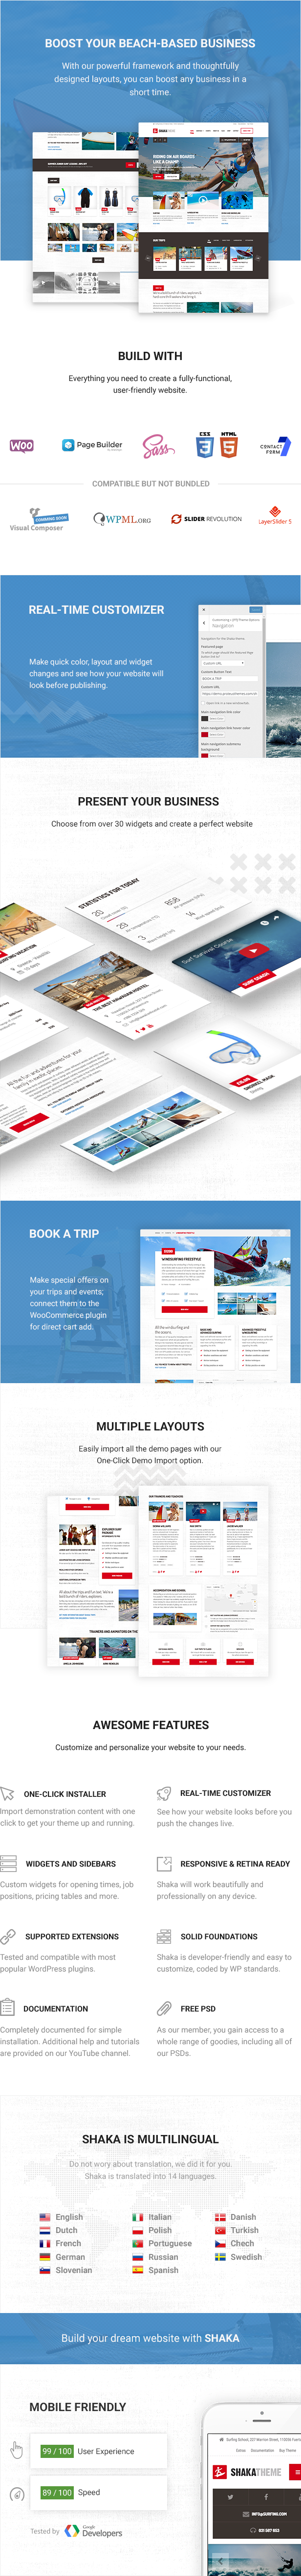 WordPress theme Shaka - A beach business WordPress theme for water sport and activity schools. Surf, kayak and more. (Travel)